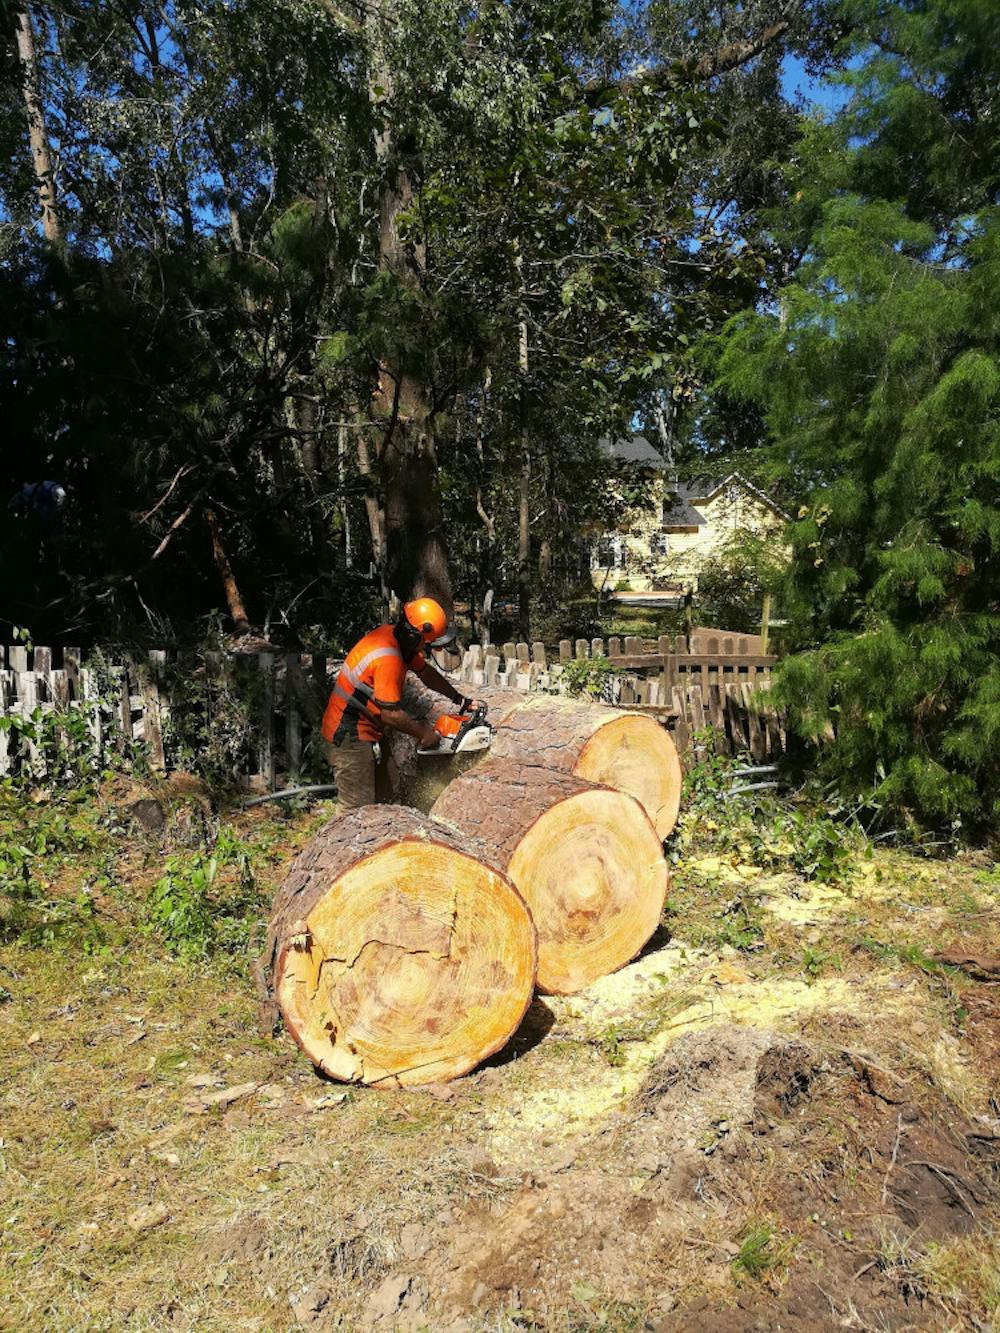 <p><span id="docs-internal-guid-6e0849d6-7fff-1125-0cd5-28f2804acb88"><span>Ryan Krammes, a 28-year-old UF forest resources and conservation junior, used a chainsaw to separate a trunk in three parts, helping remove fallen trees in Tallahassee, Florida.</span></span></p>